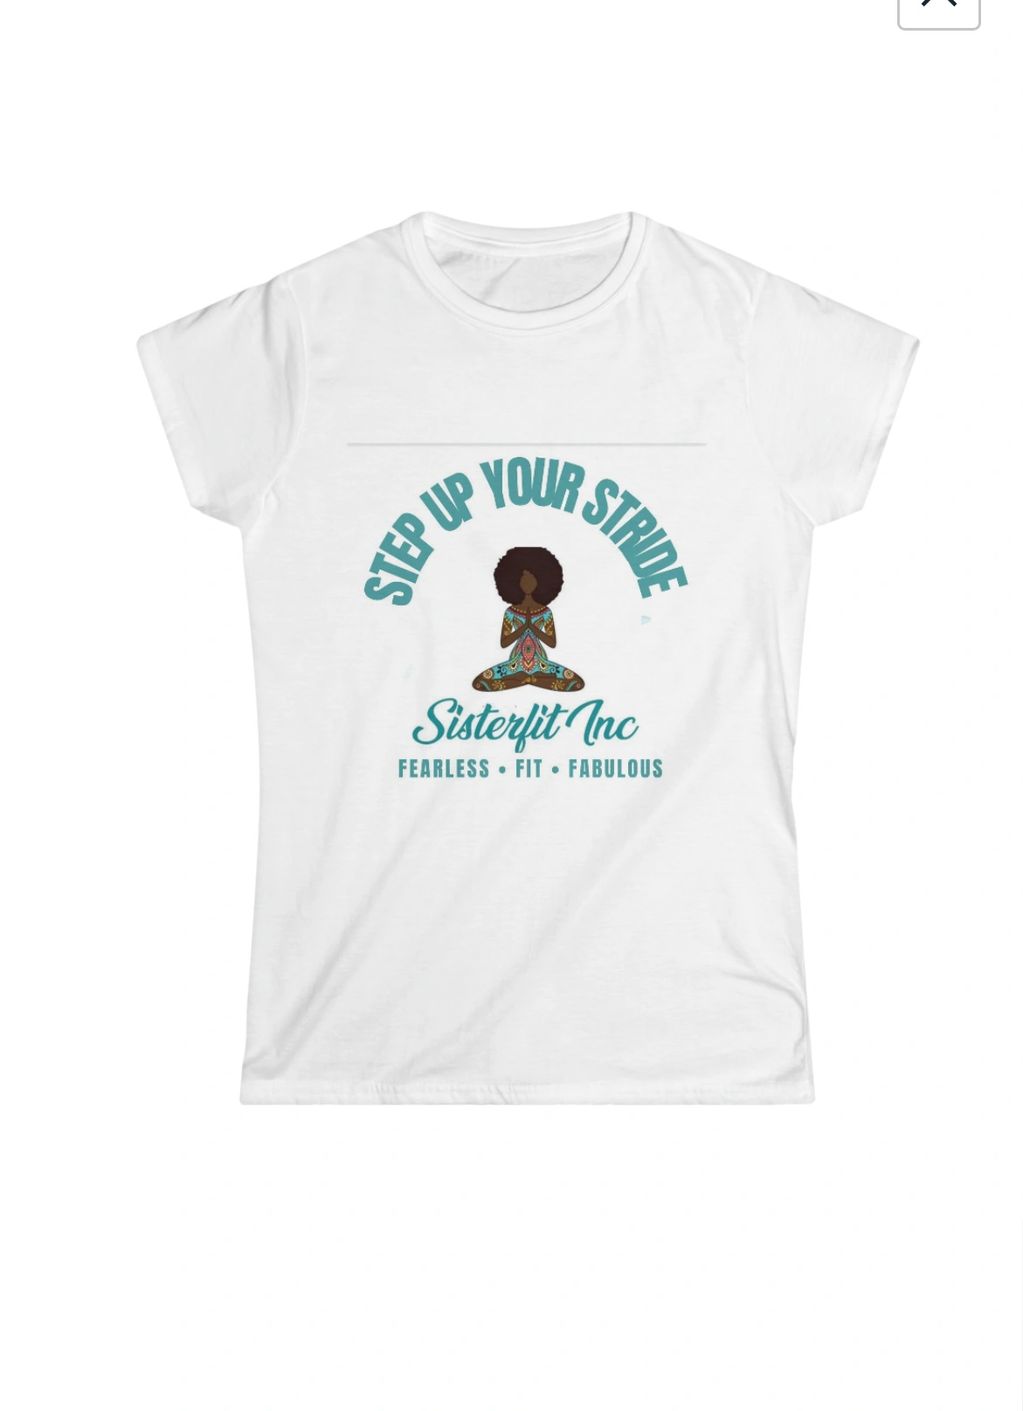 White or gray cotton t-shirt (Step Up Your Stride)